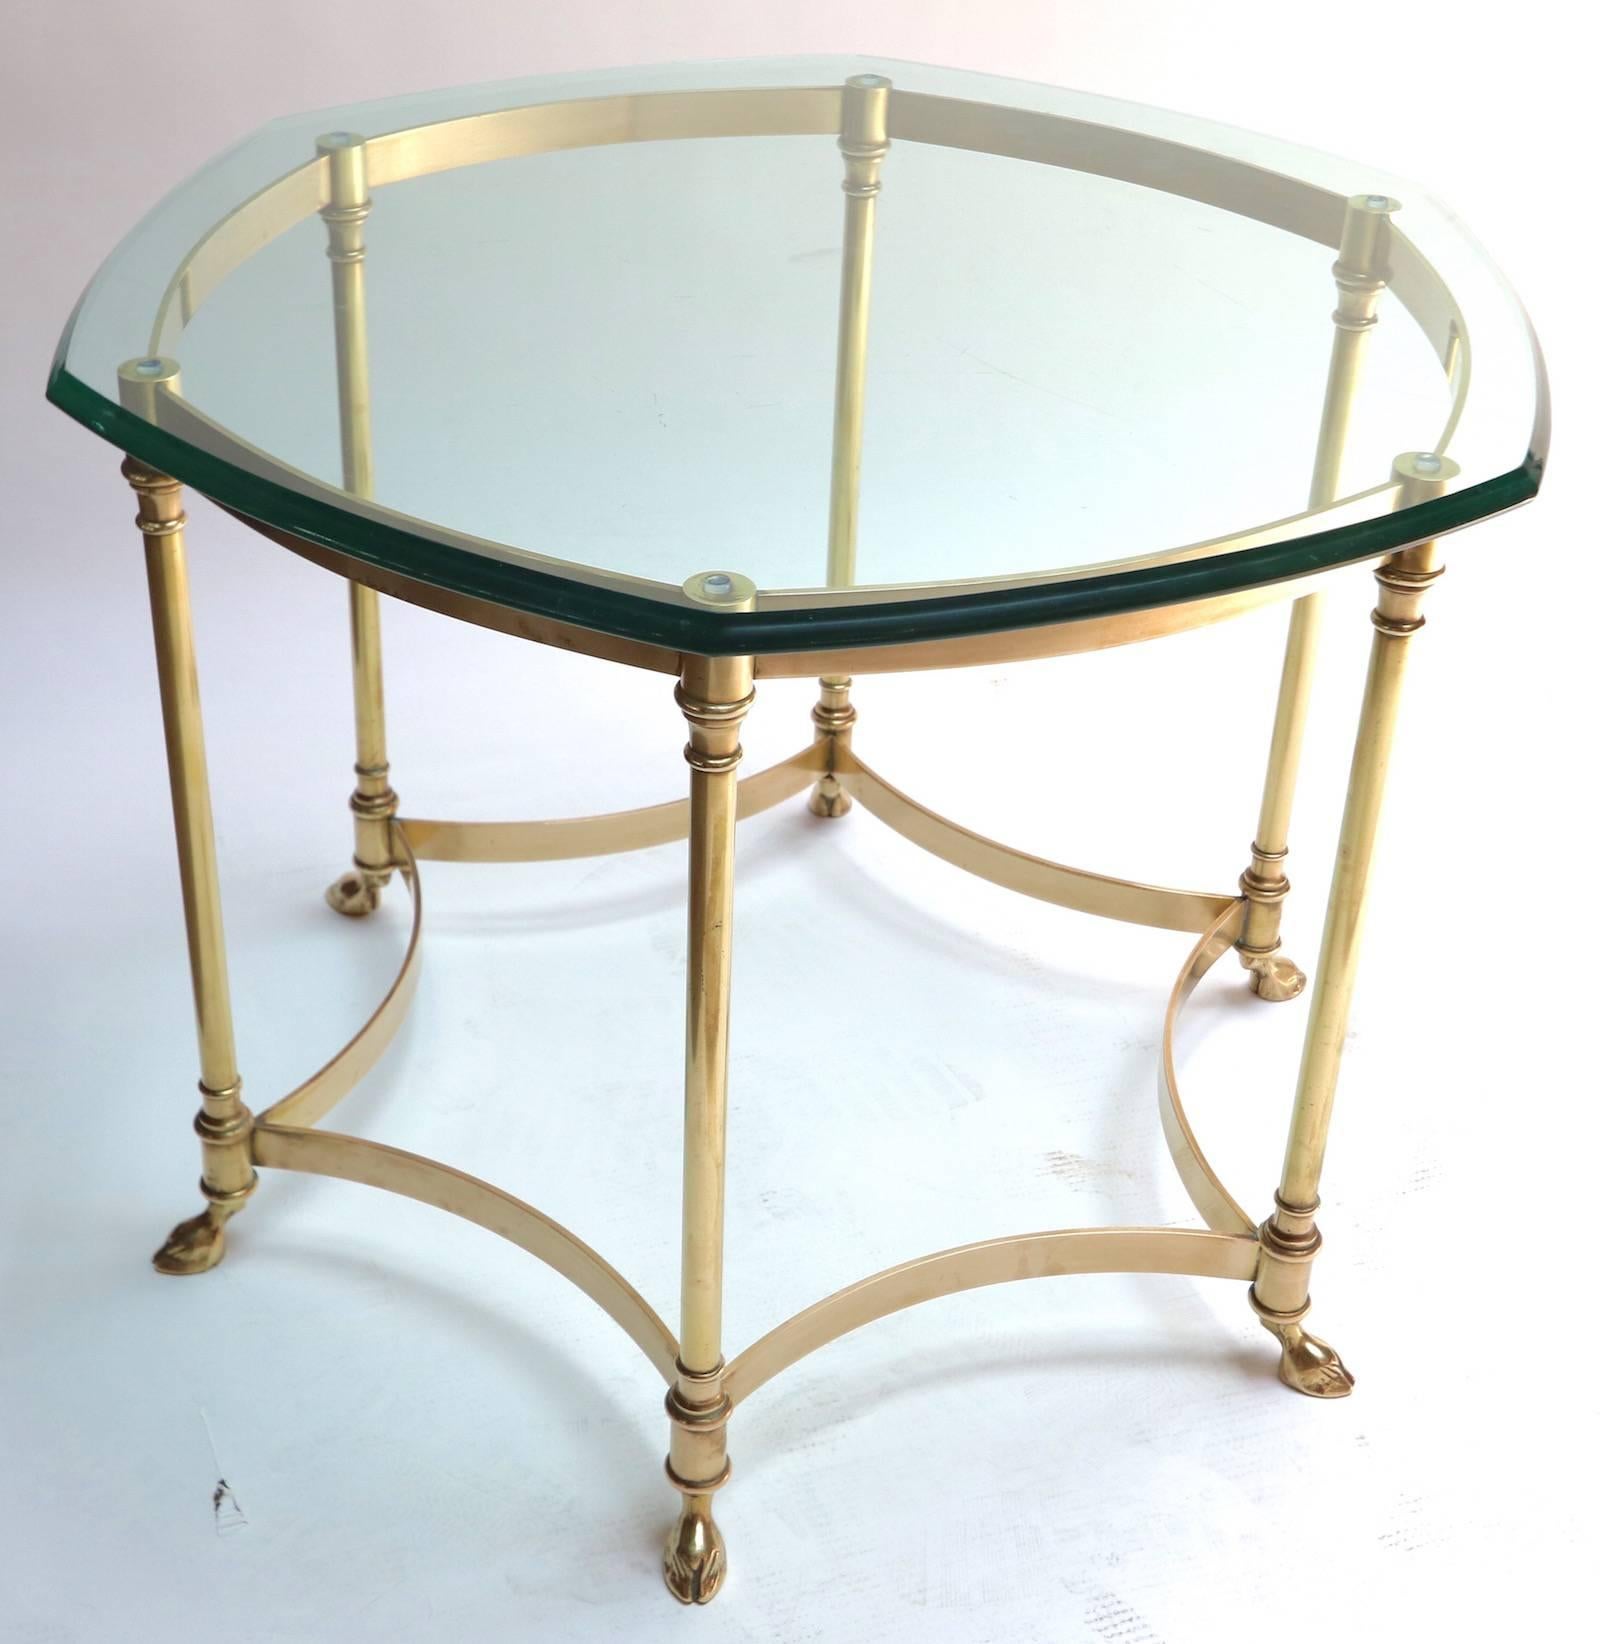 Hexagonal Brass Side Table with Glass Top and Goat Feet 1